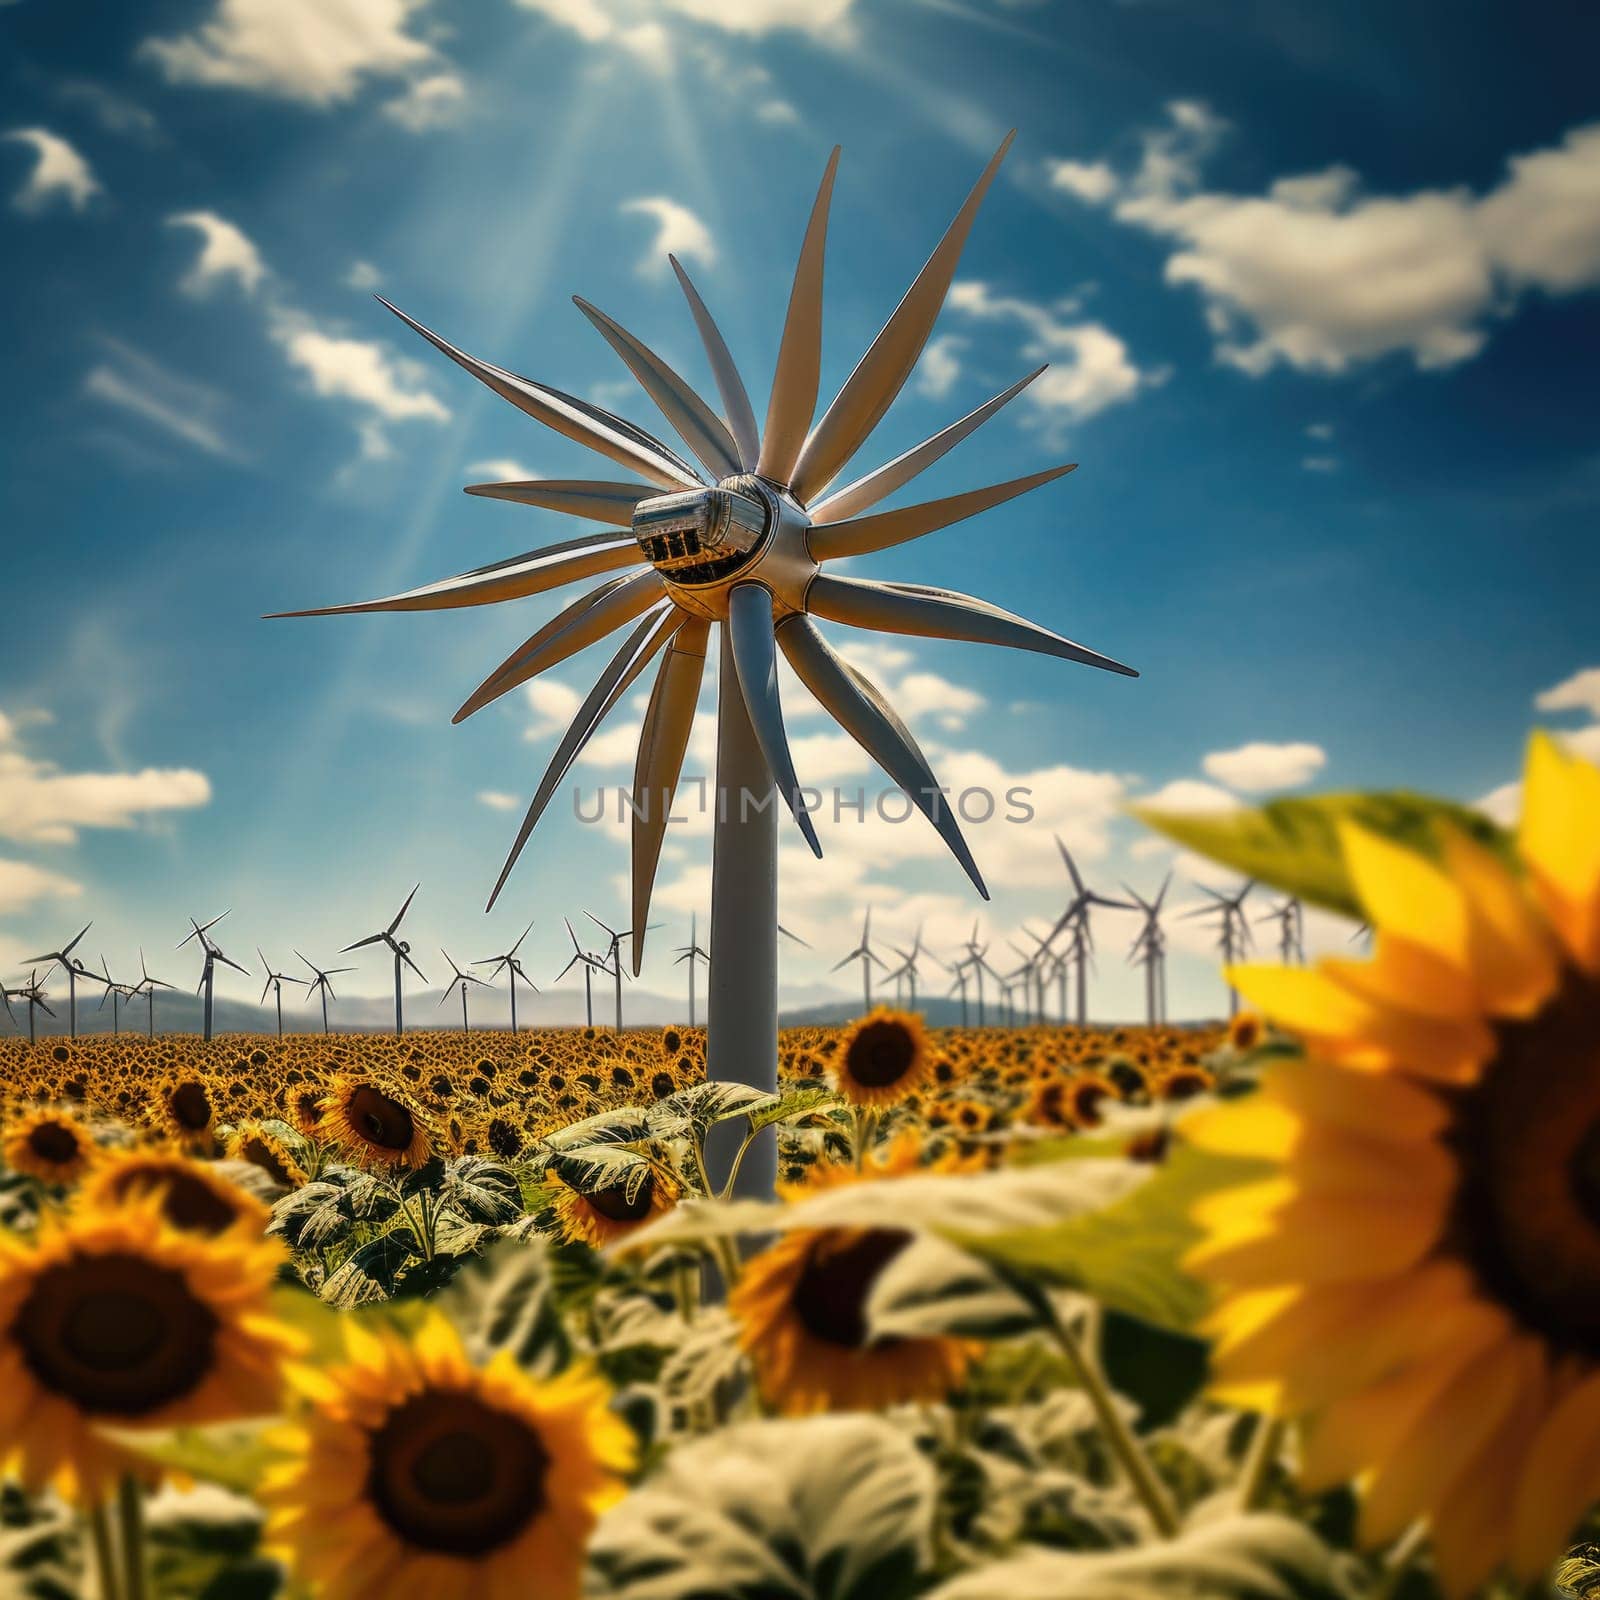 A photo capturing a vast field of sunflowers with a windmill standing in the background.